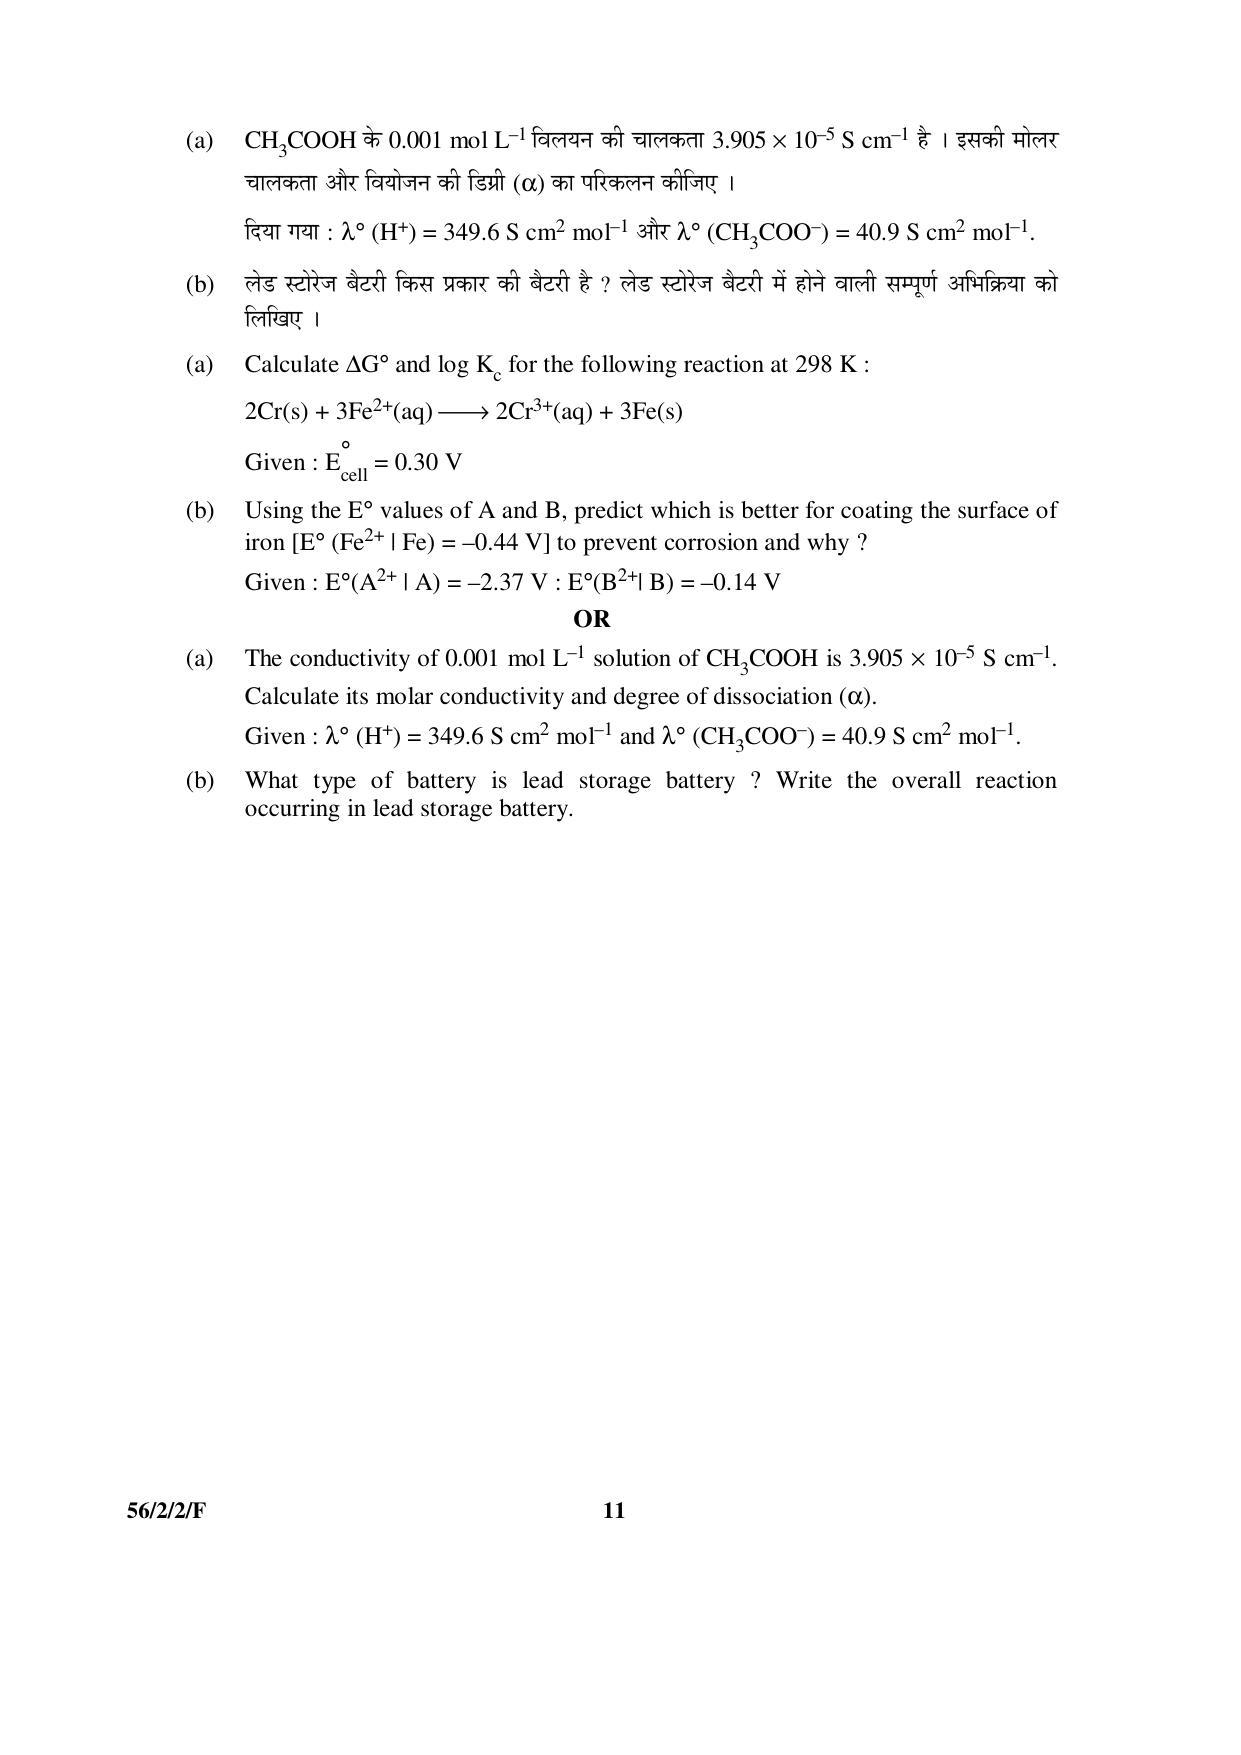 CBSE Class 12 56-2-2-F _Chemistry_ 2016 Question Paper - Page 11